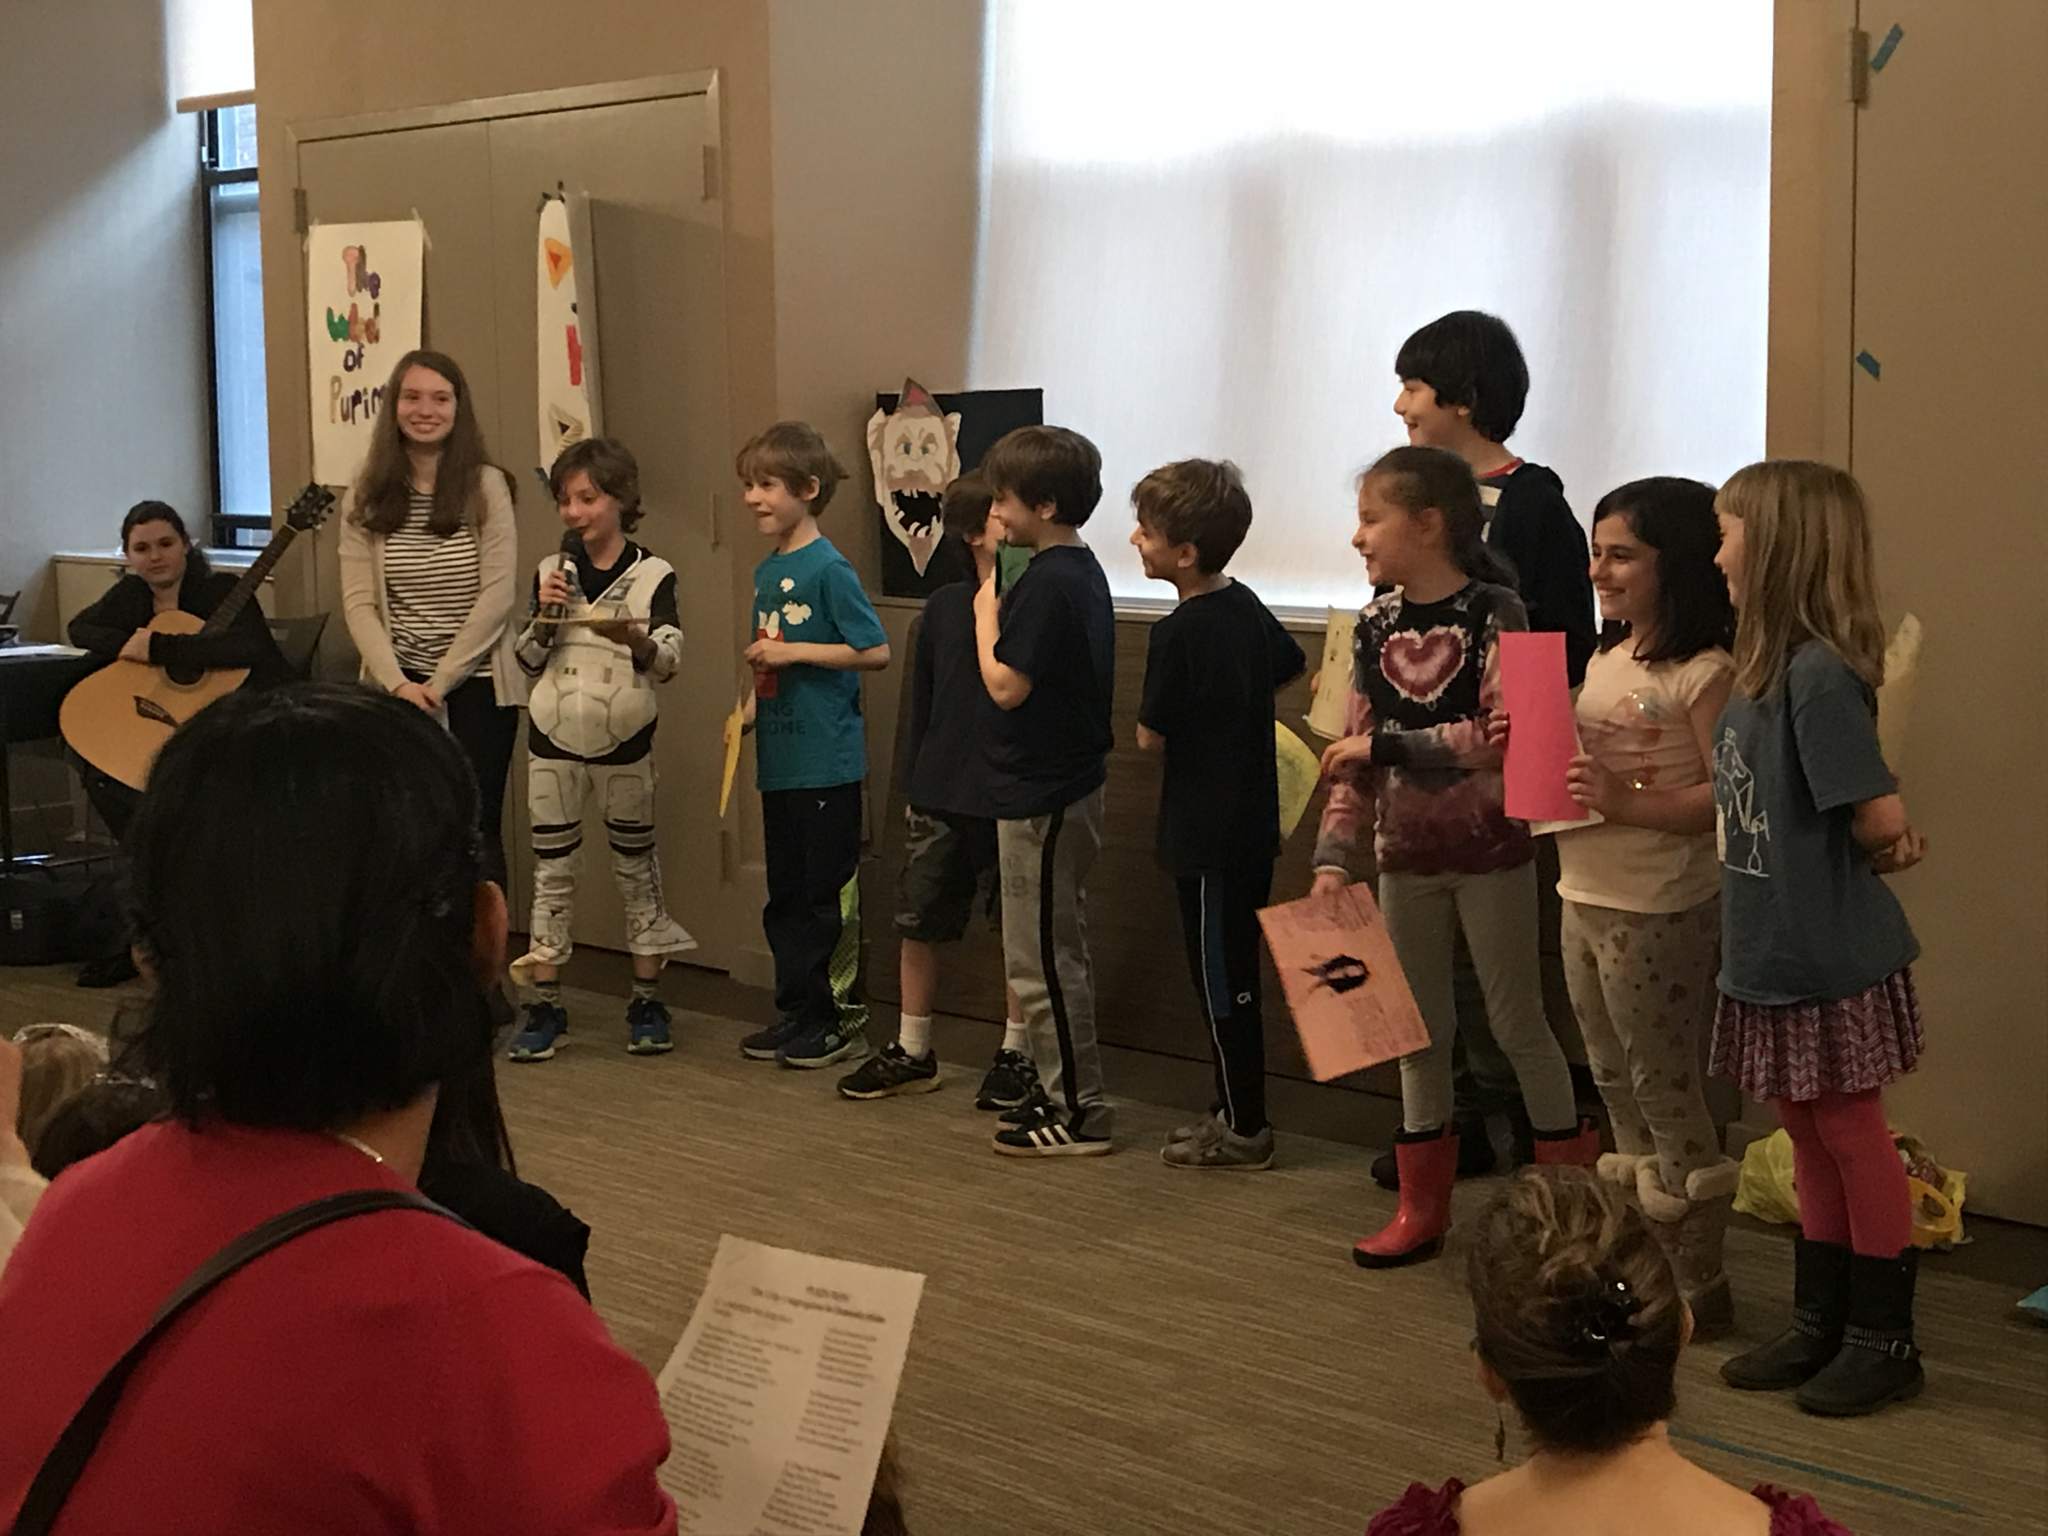 kidschool purim party 2018 education holiday